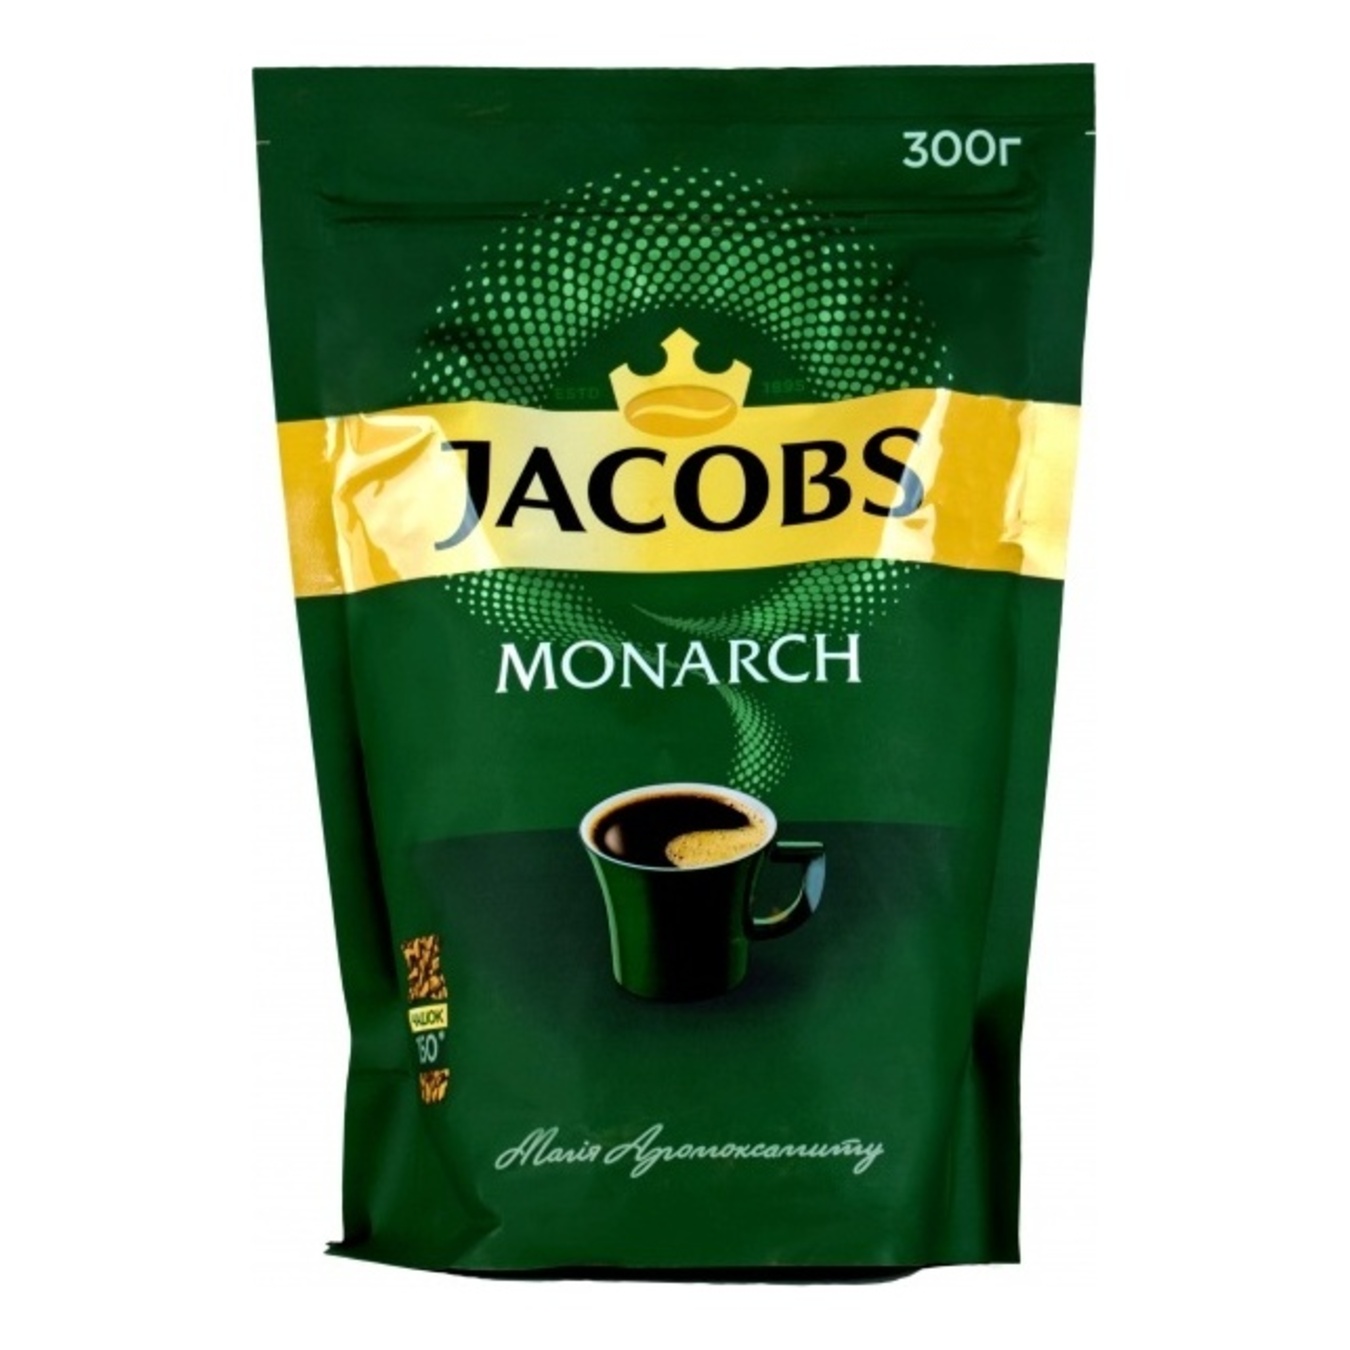 Jacobs Monarch Instant Coffee 300g